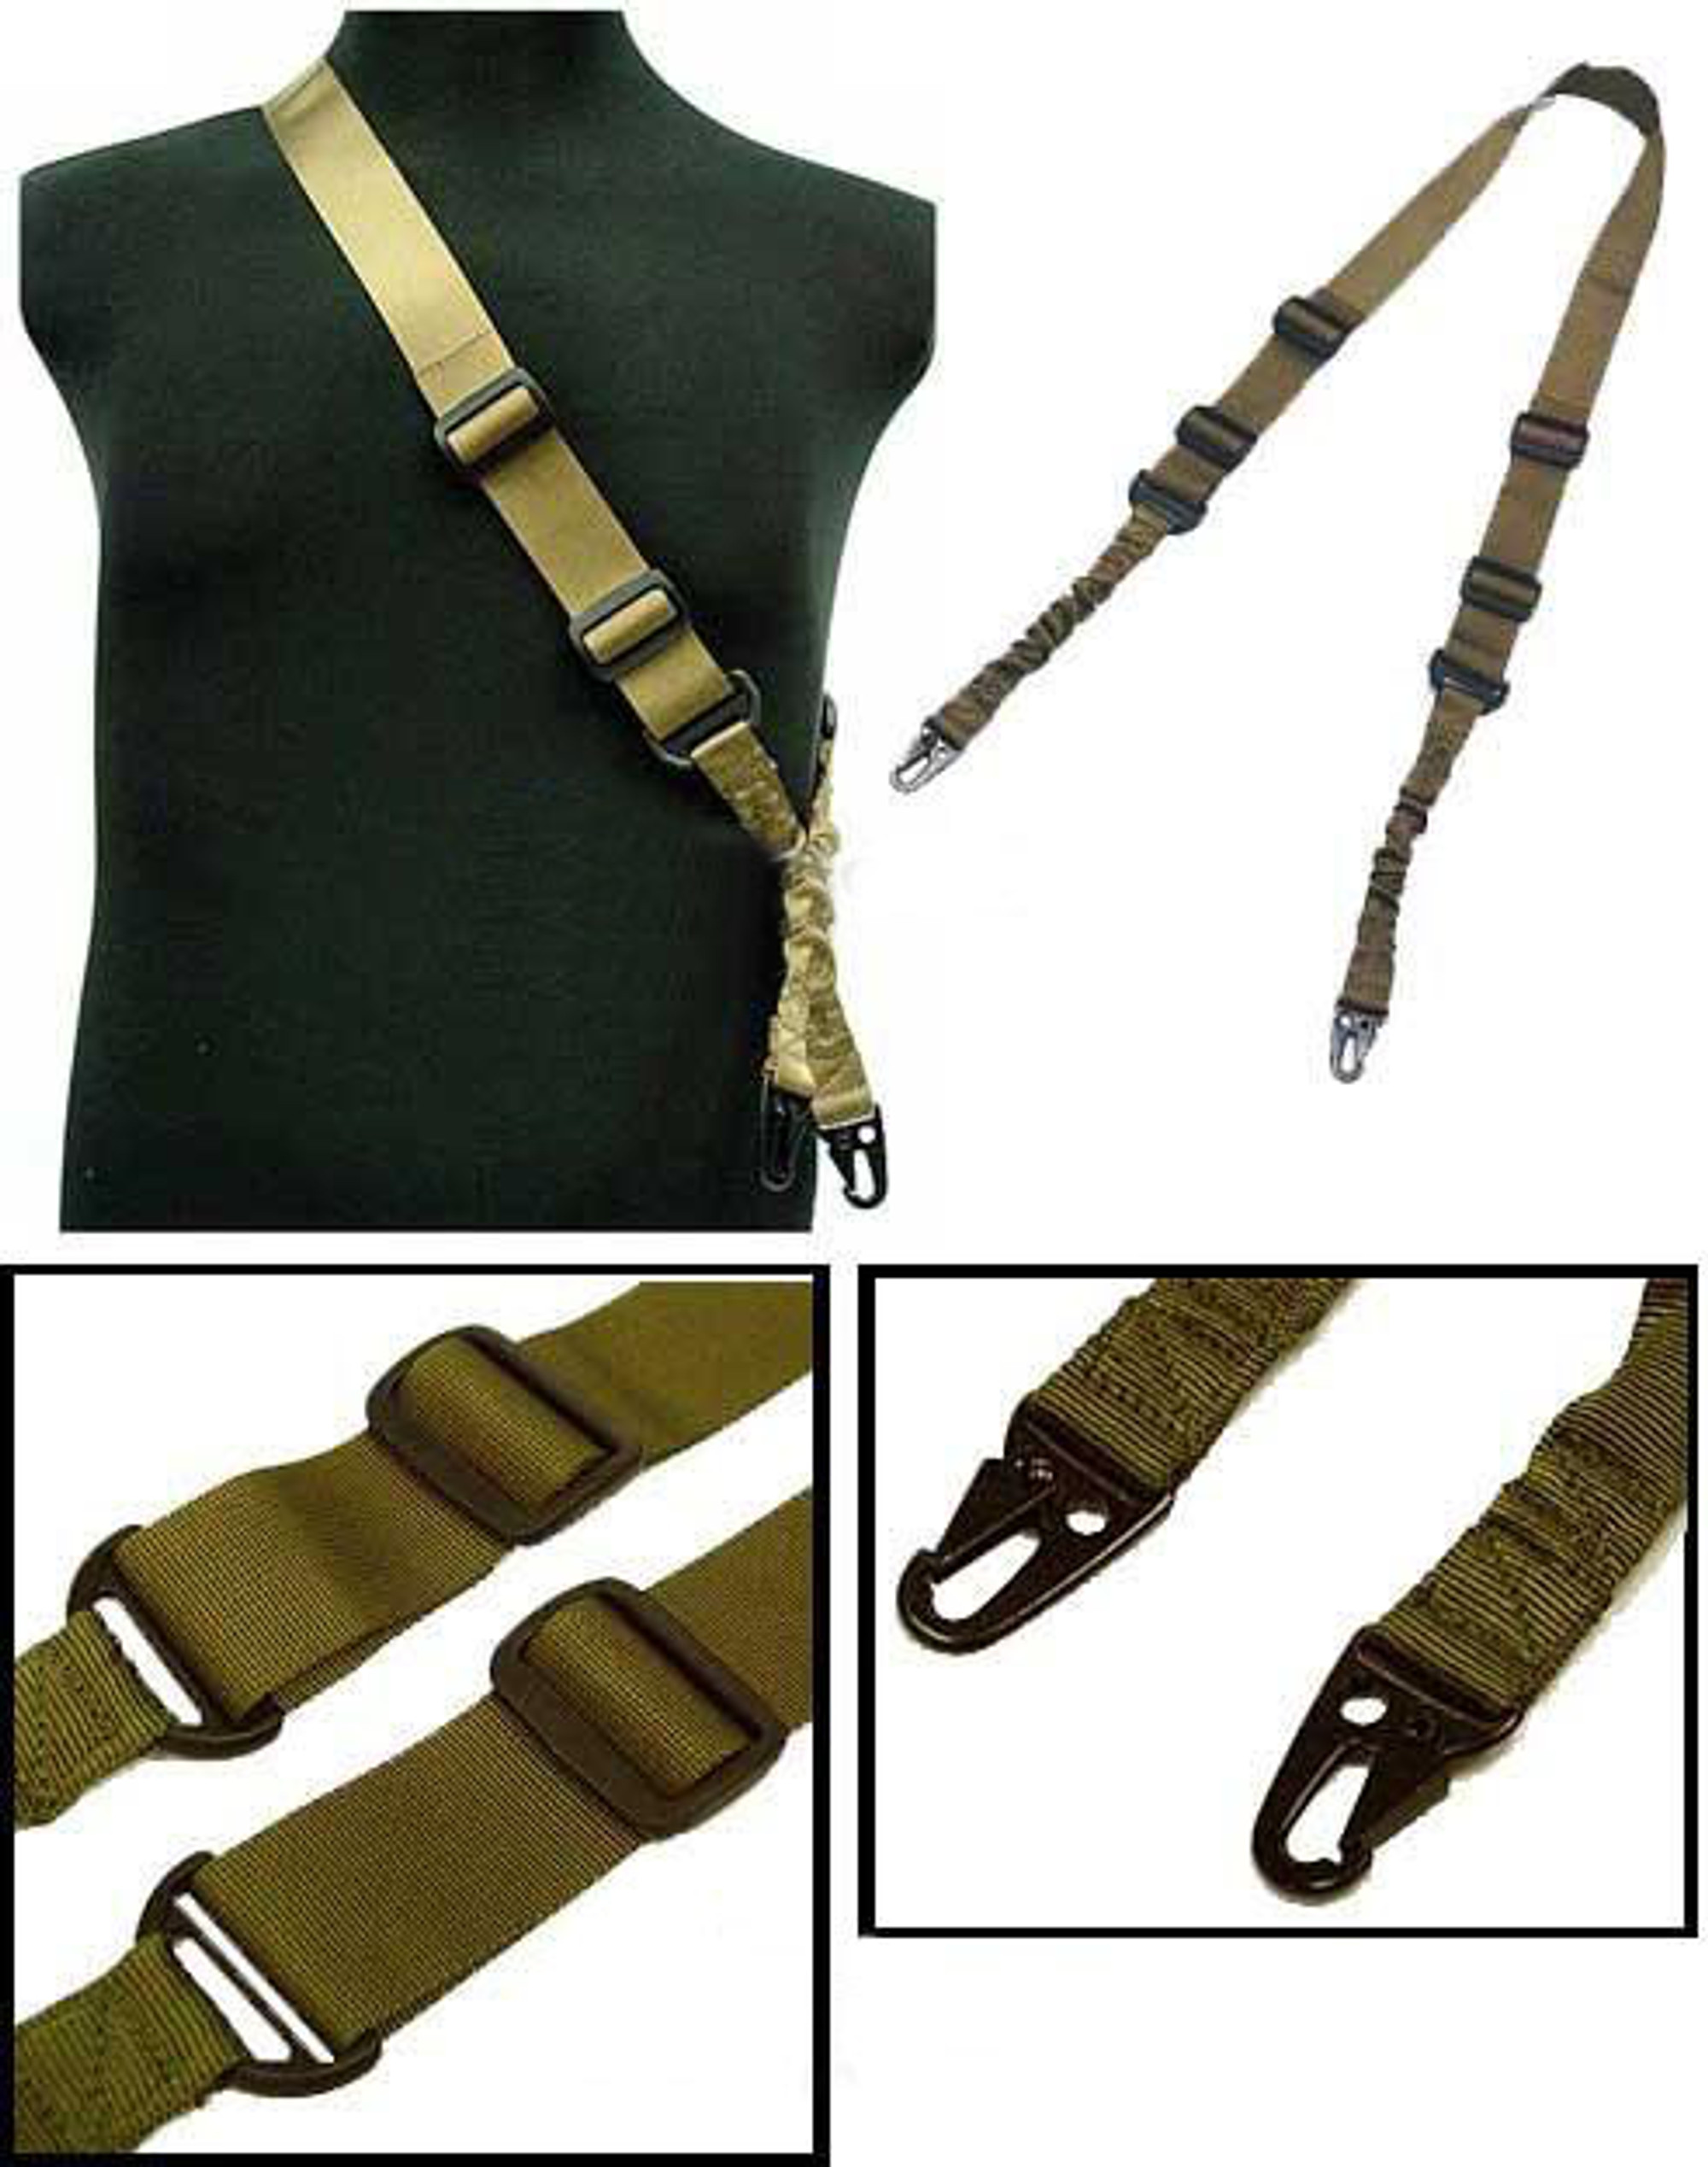 Matrix Military Style Tactical 2-Point Bungee Sling - Coyote Tan